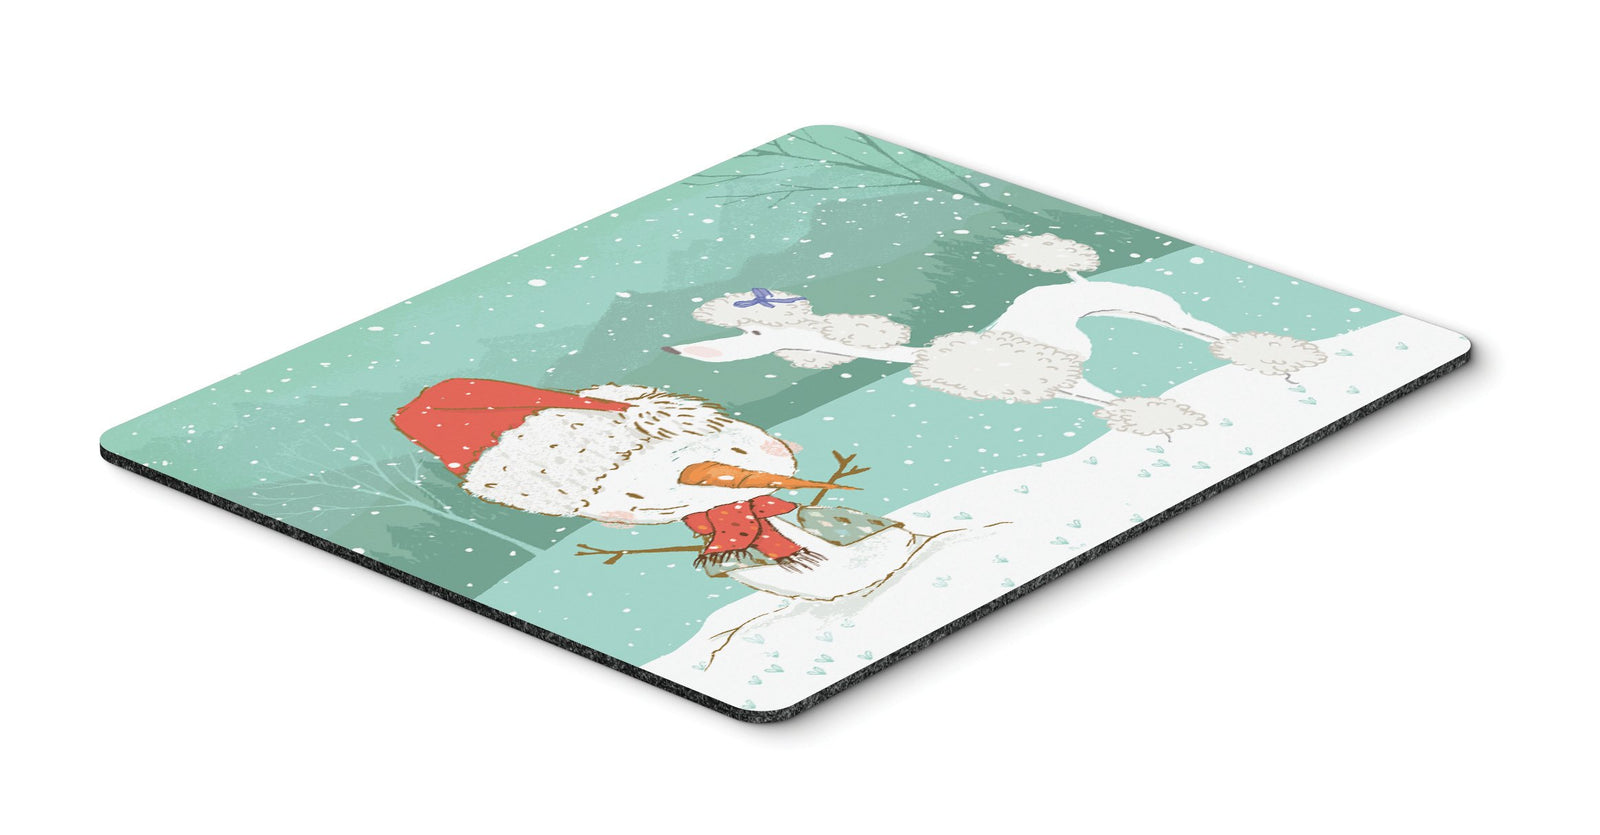 White Poodle Snowman Christmas Mouse Pad, Hot Pad or Trivet CK2067MP by Caroline's Treasures